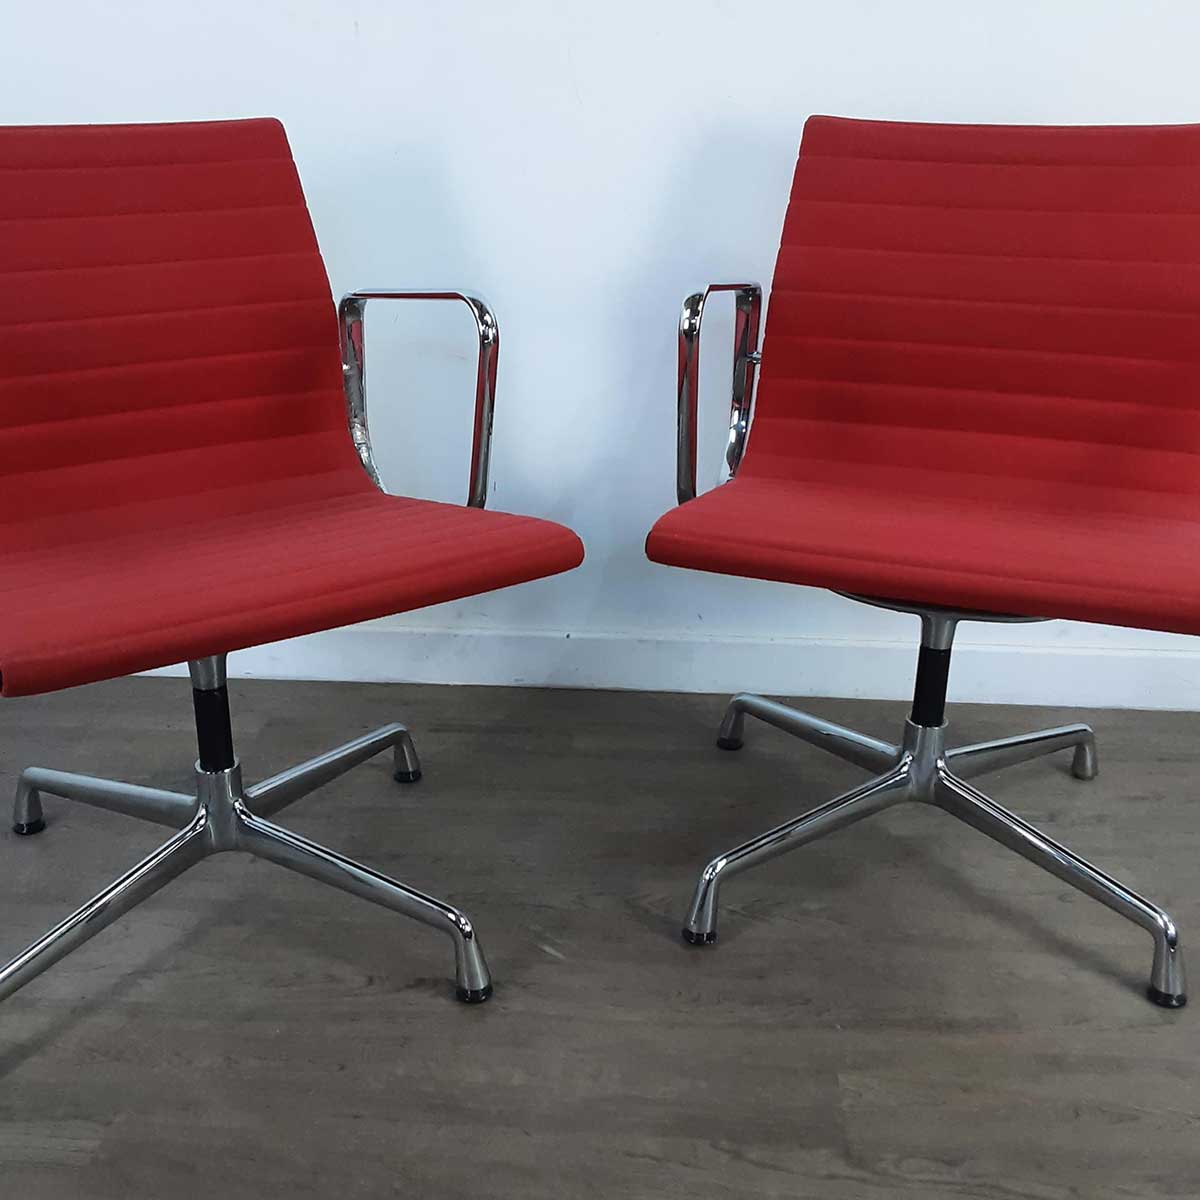 An American Design Classic to Make You Sit Up and Take Notice